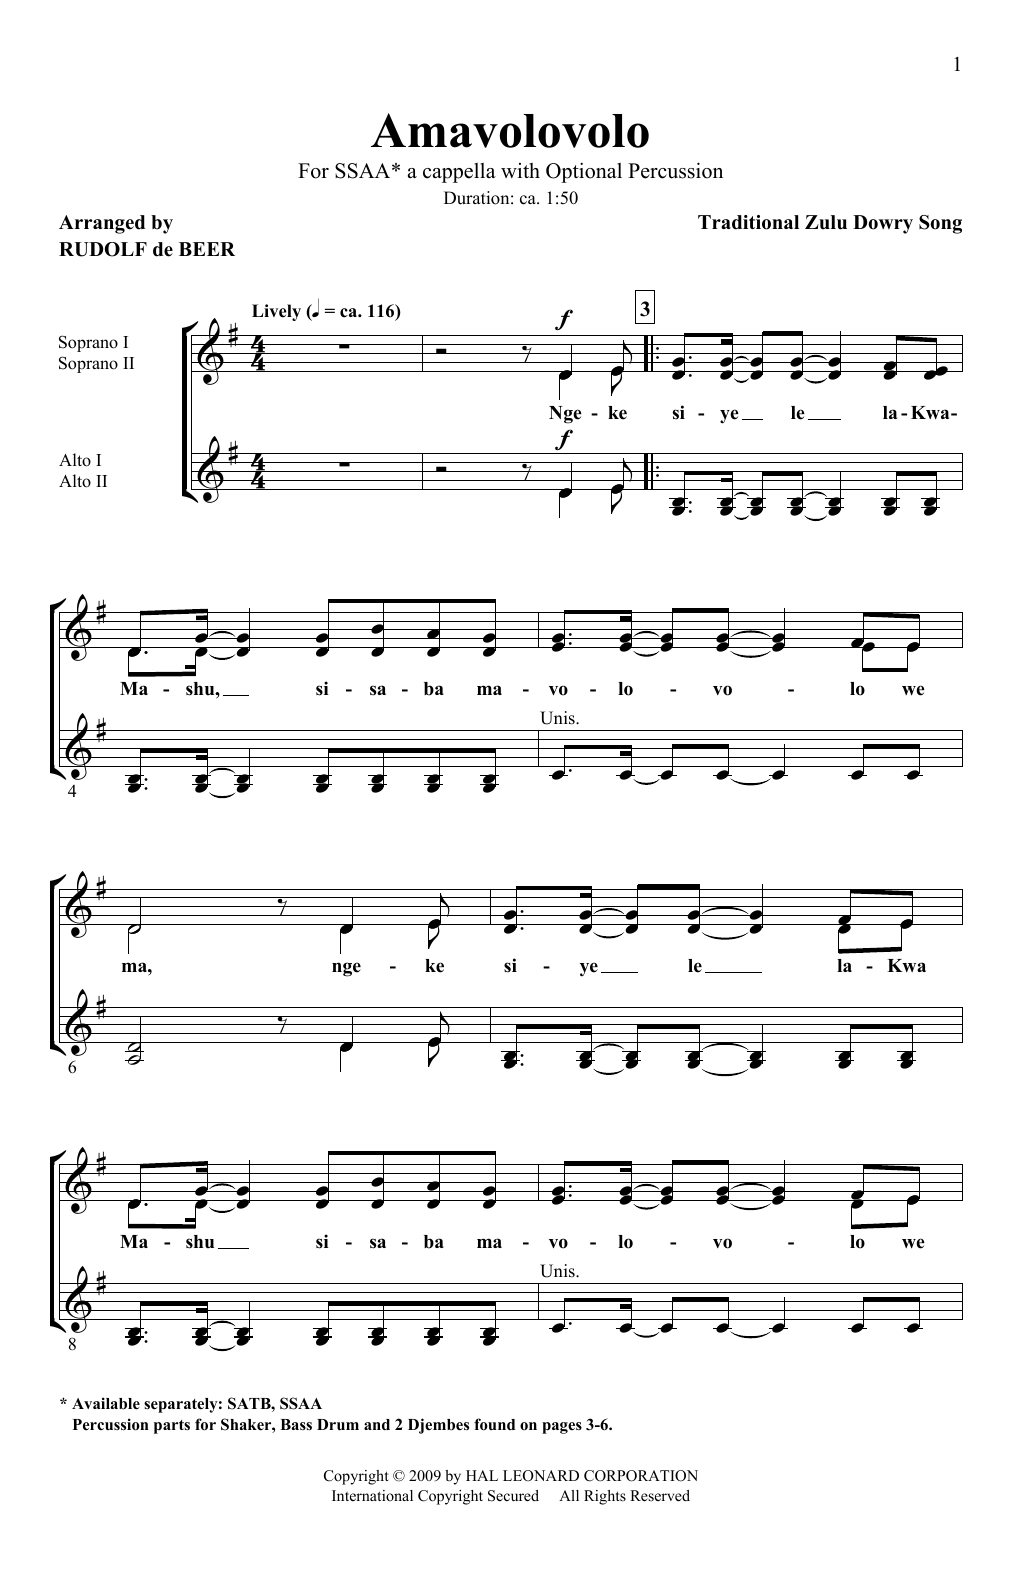 Traditional Zulu Dowry Song Amavolovolo (arr. Rudolf de Beer) sheet music notes and chords arranged for SATB Choir